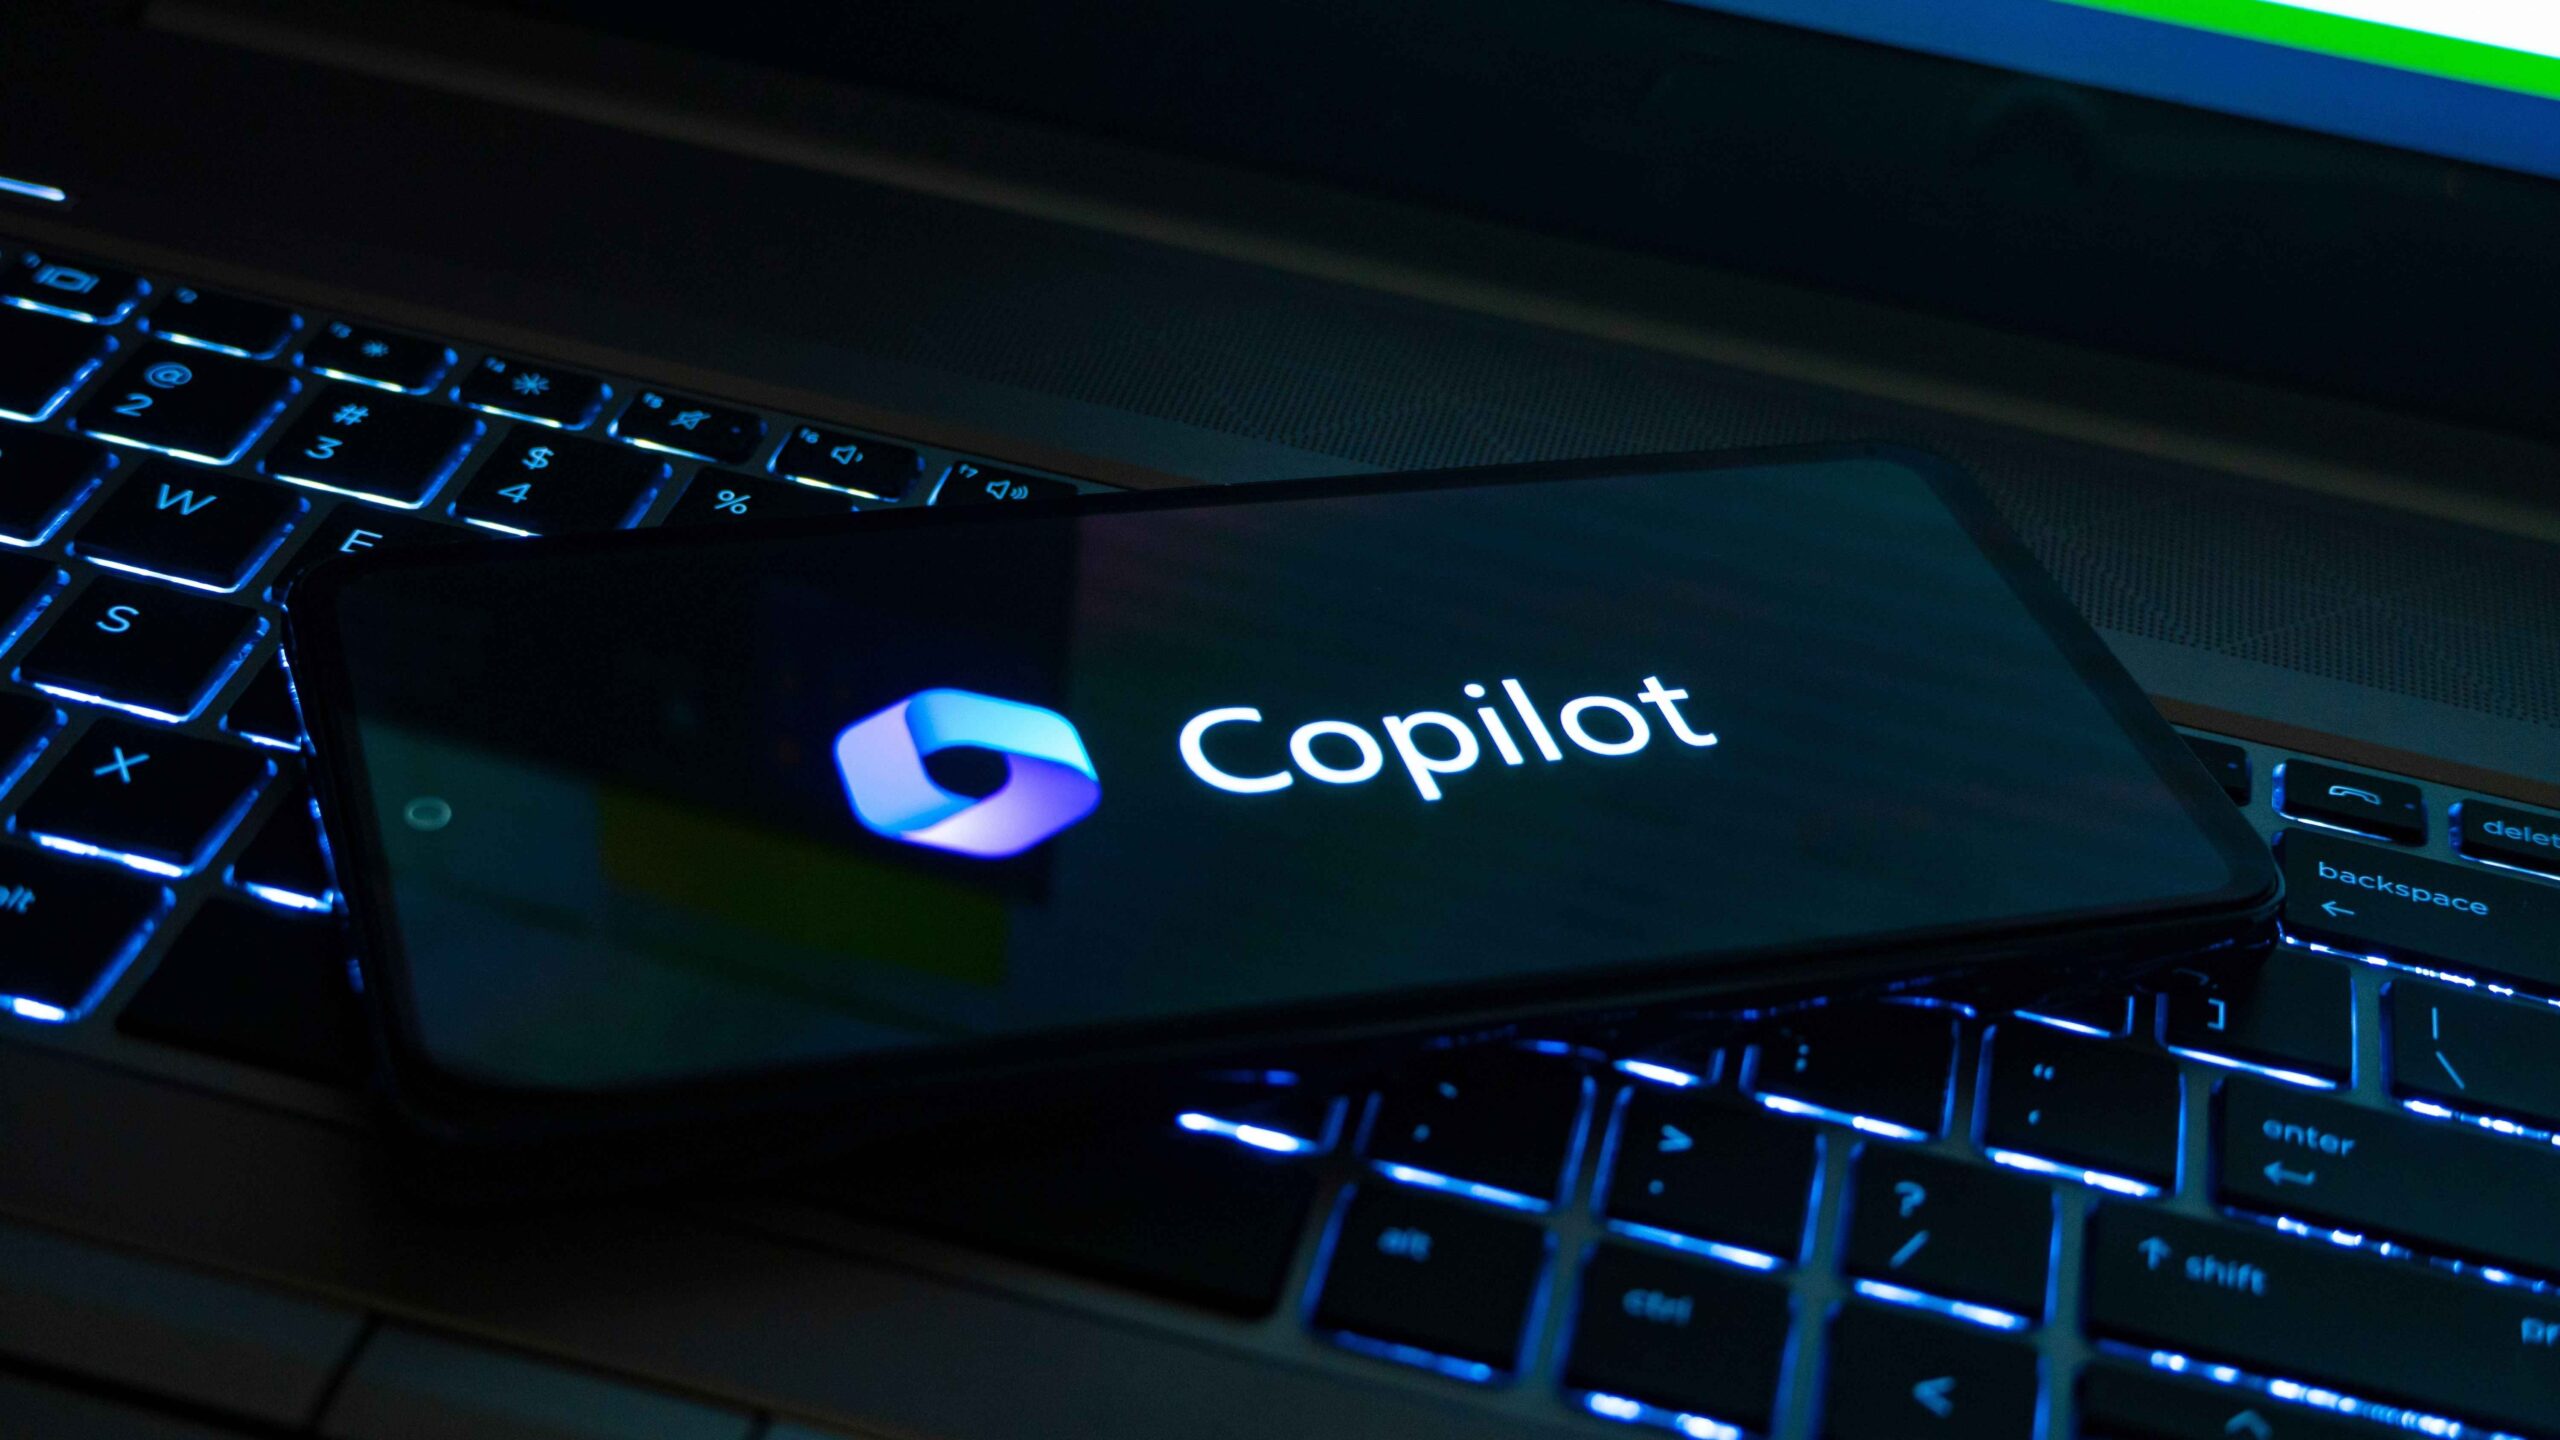 Microsoft claims a Copilot key will appear on Windows keyboards this month.